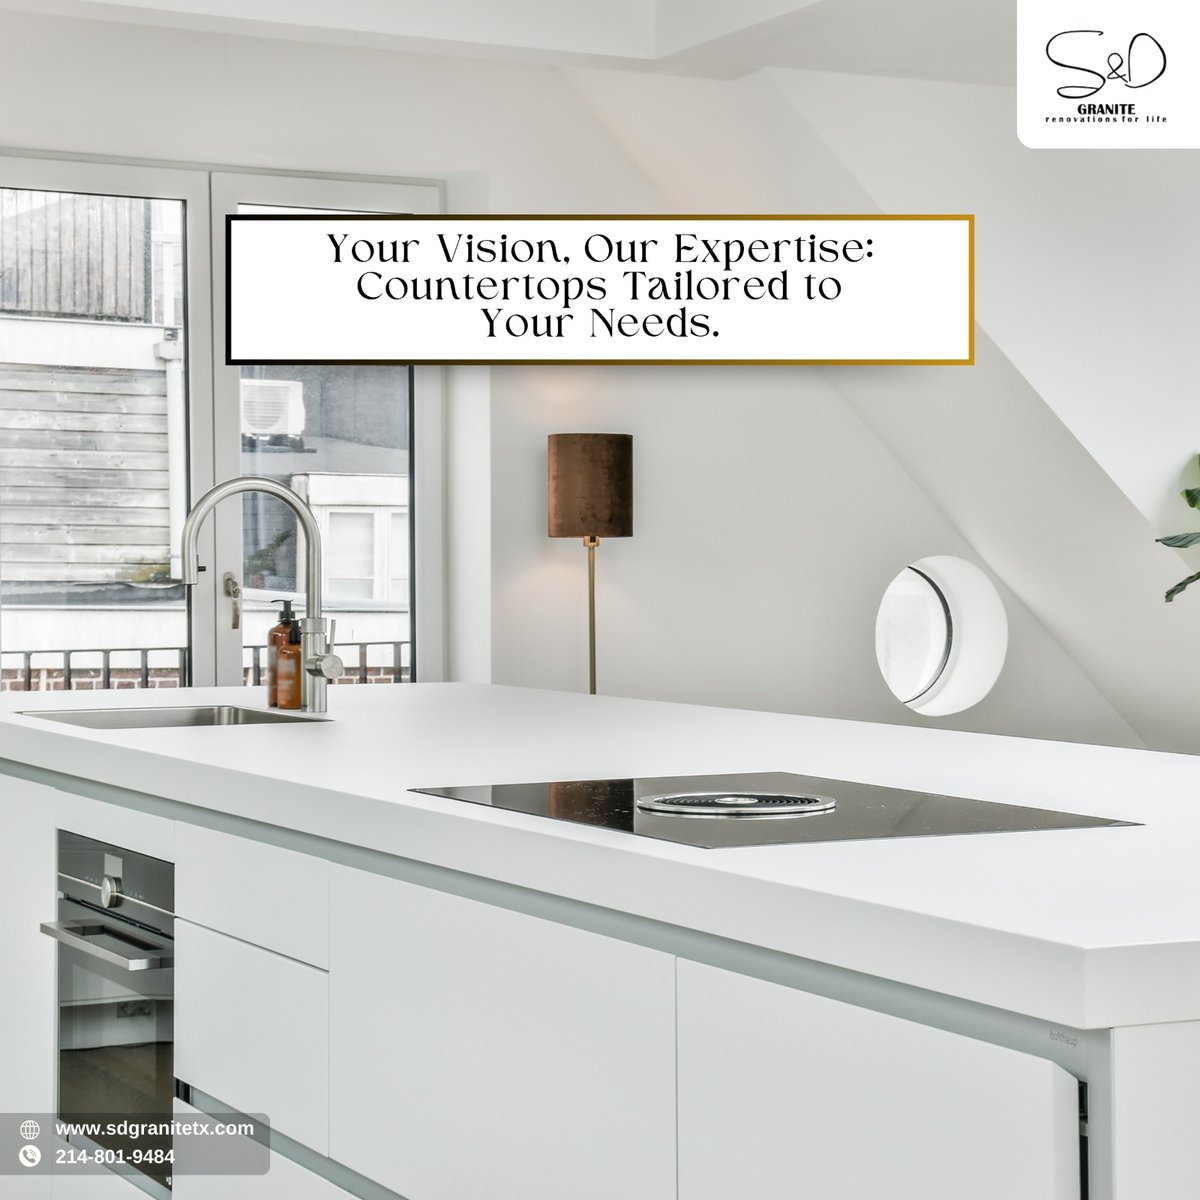 The Countertop Experts: We Help You Create a Kitchen You'll Love.

Contact us for more:
Visit sdgranitetx.com📍
Call - 📞214-801-9484

#granite #marblecountertops #quartzitecountertops #granitecounters #granitecountertops #marble #tiles #kitchendecor #kitchenideas